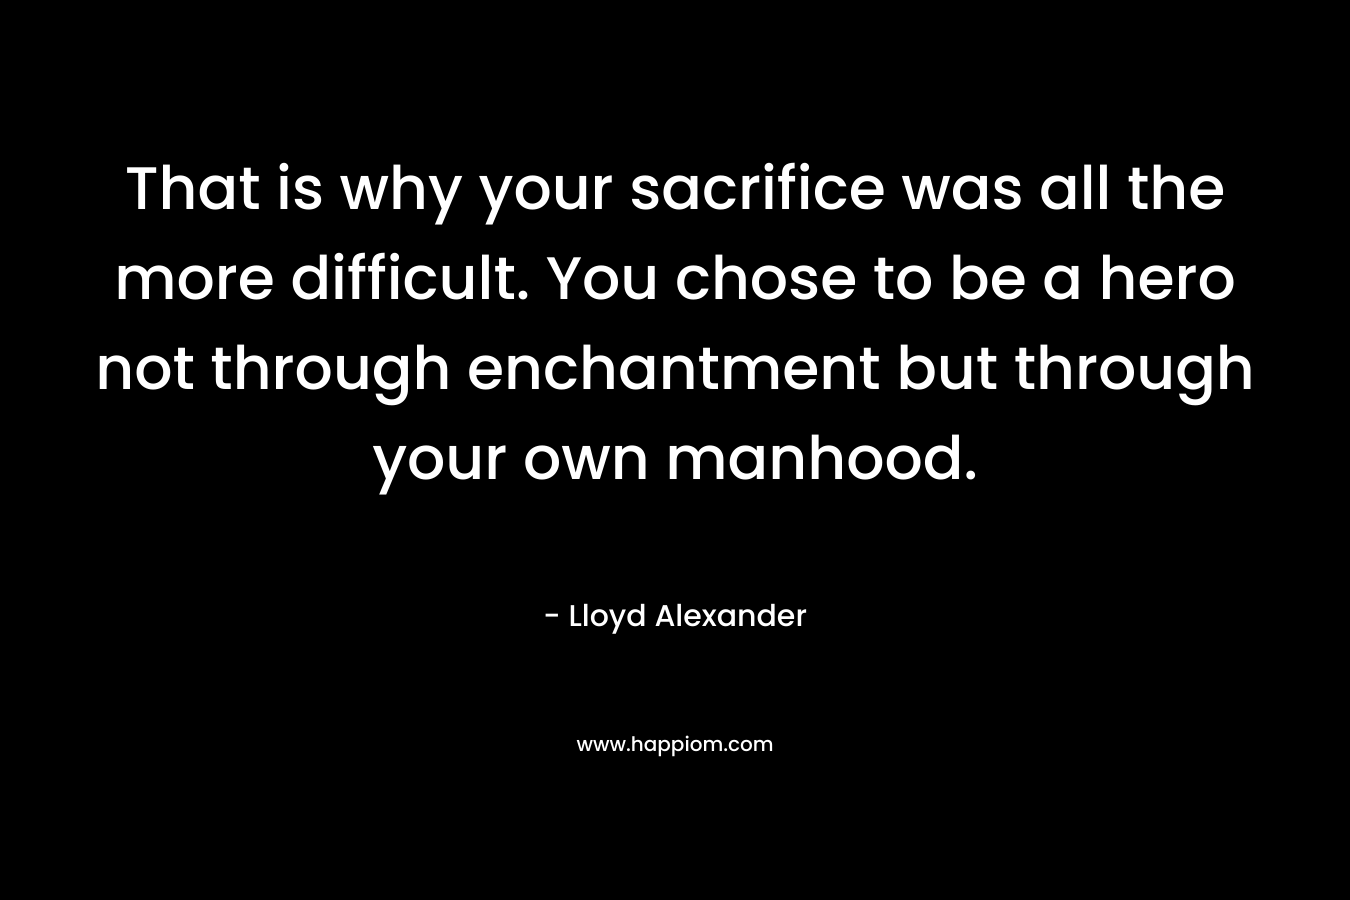 That is why your sacrifice was all the more difficult. You chose to be a hero not through enchantment but through your own manhood. – Lloyd Alexander